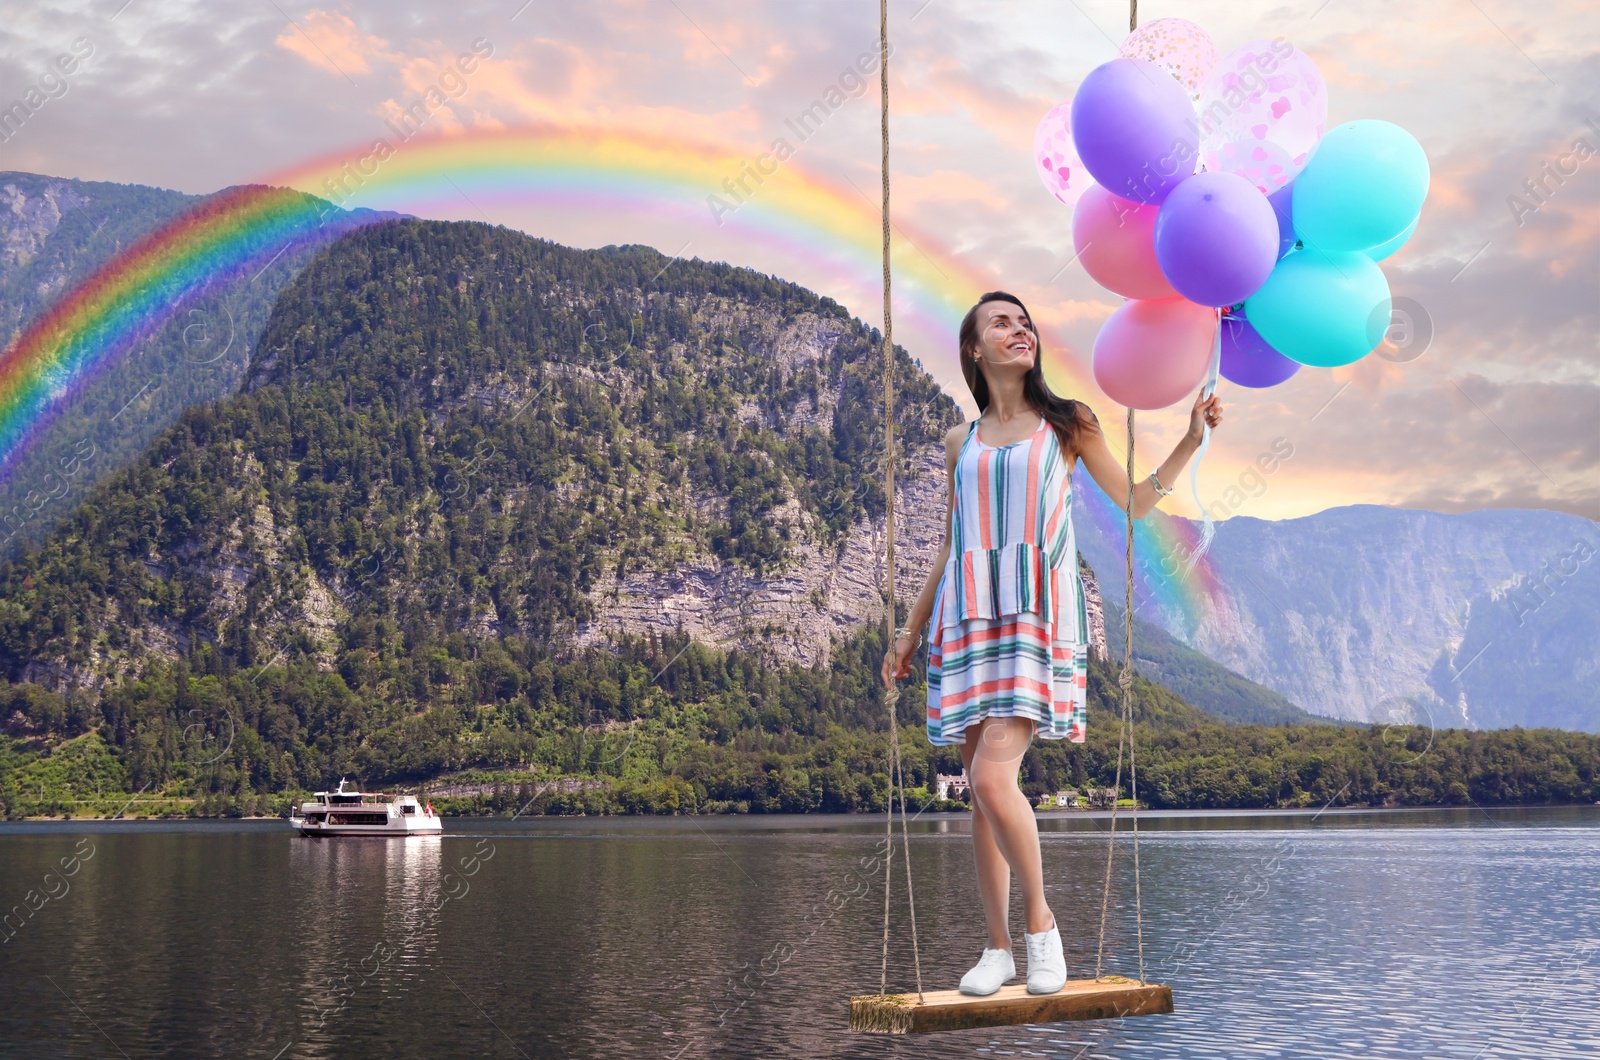 Image of Dream world. Young woman with bright balloons swinging, mountains and lake on background